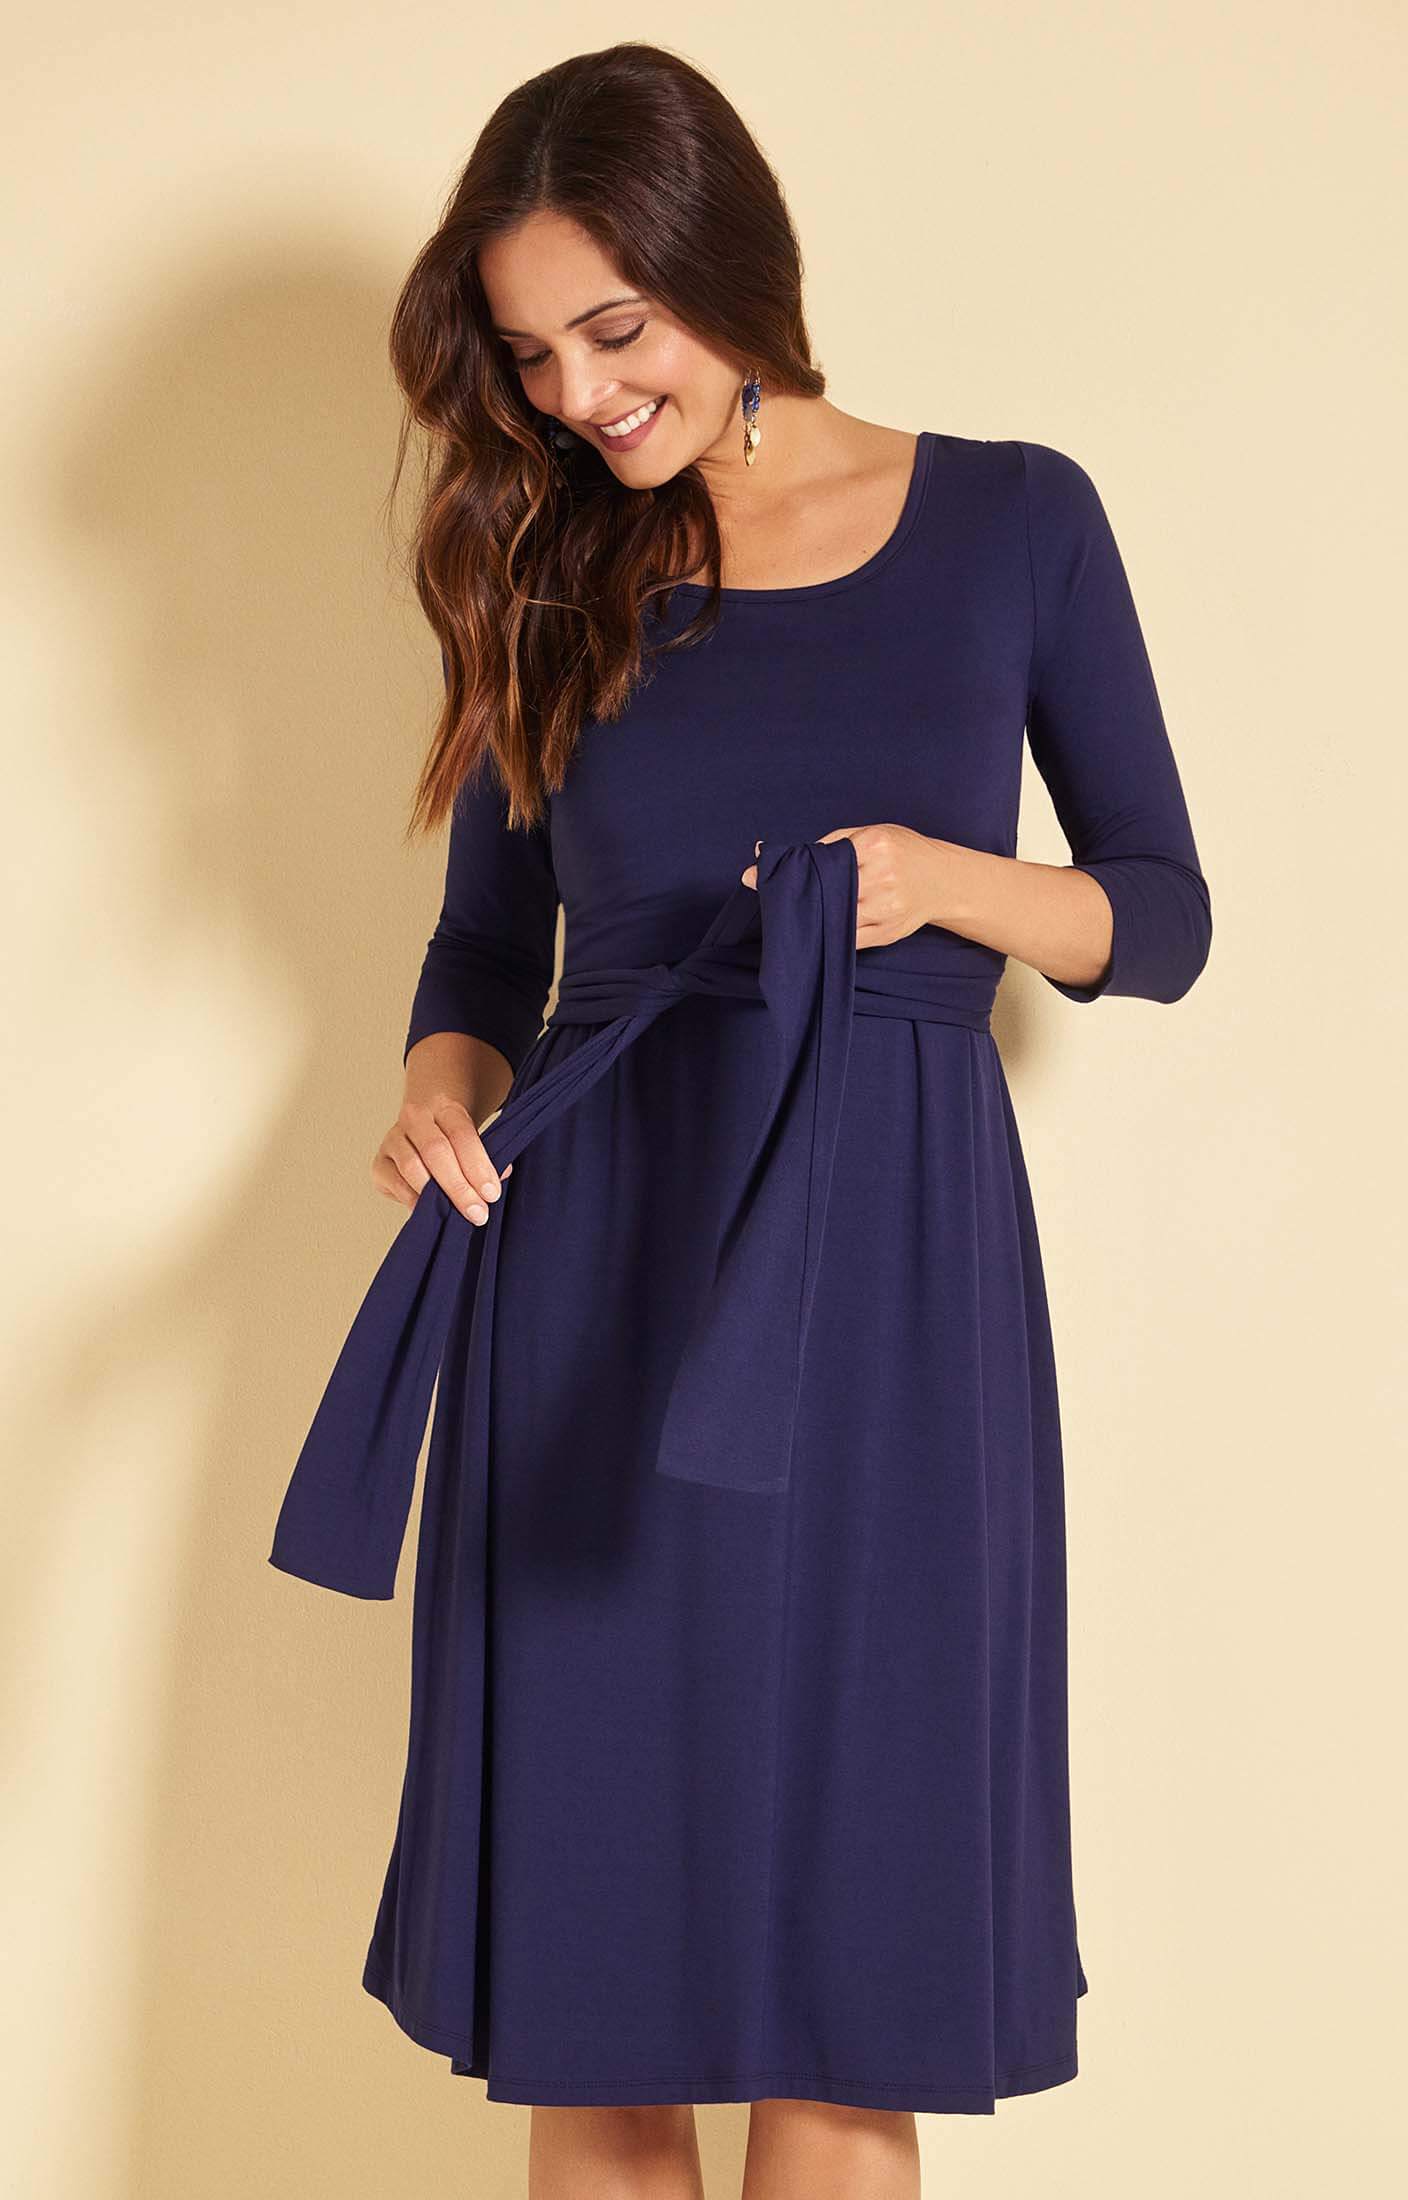 Naomi Maternity Nursing Dress Eclipse Blue - Maternity Wedding Dresses,  Evening Wear and Party Clothes by Tiffany Rose